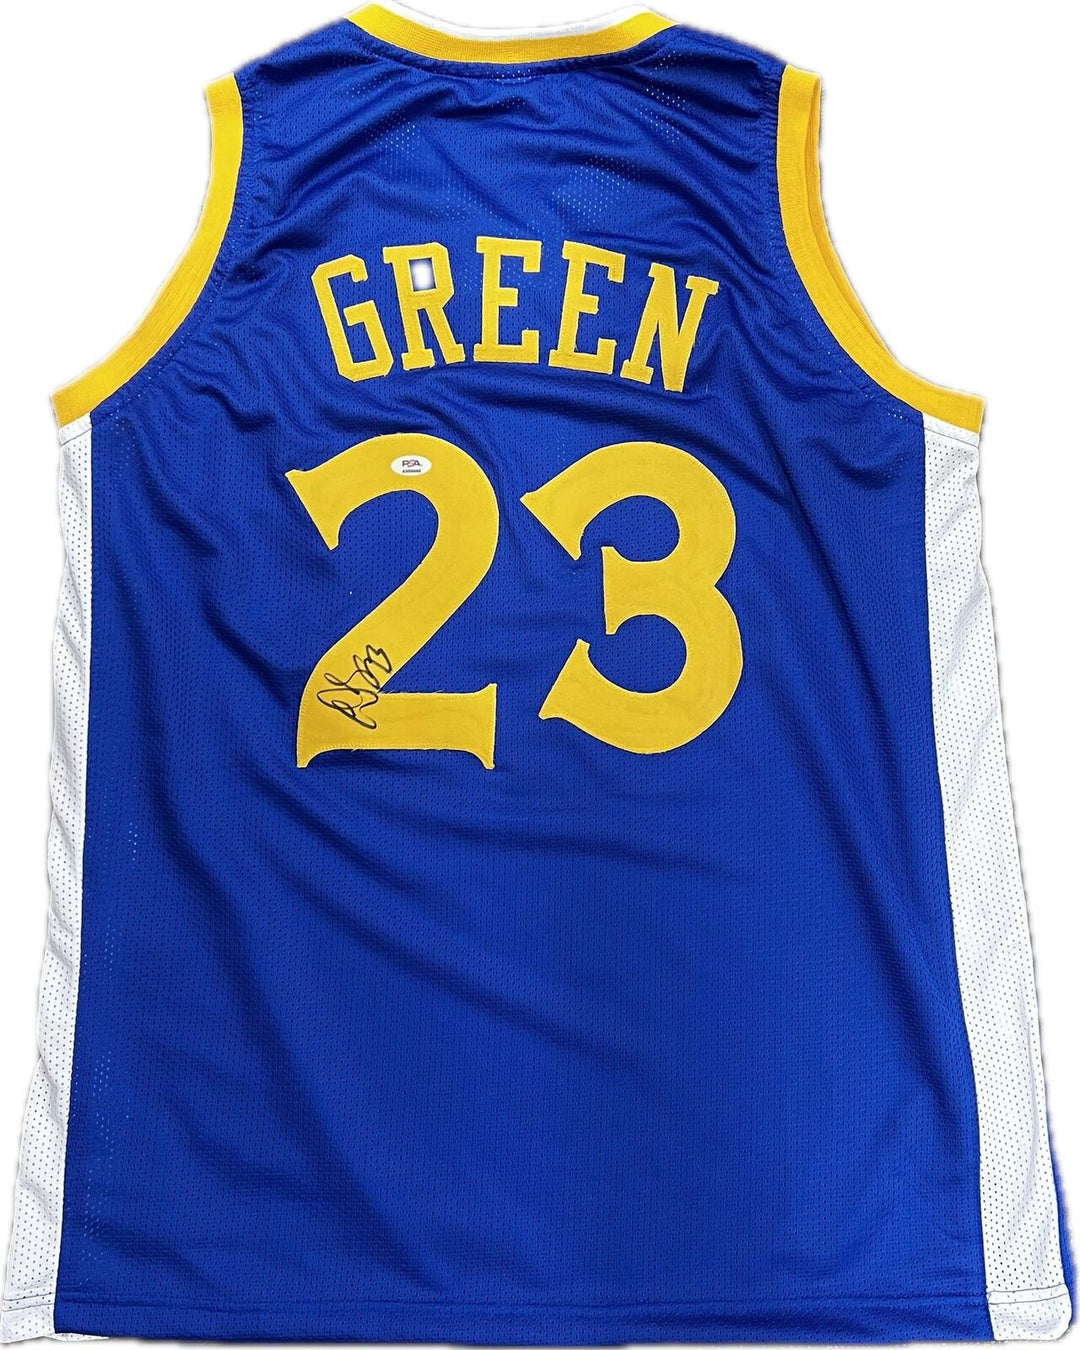 Draymond Green signed jersey PSA/DNA Golden State Warriors Autographed Image 1